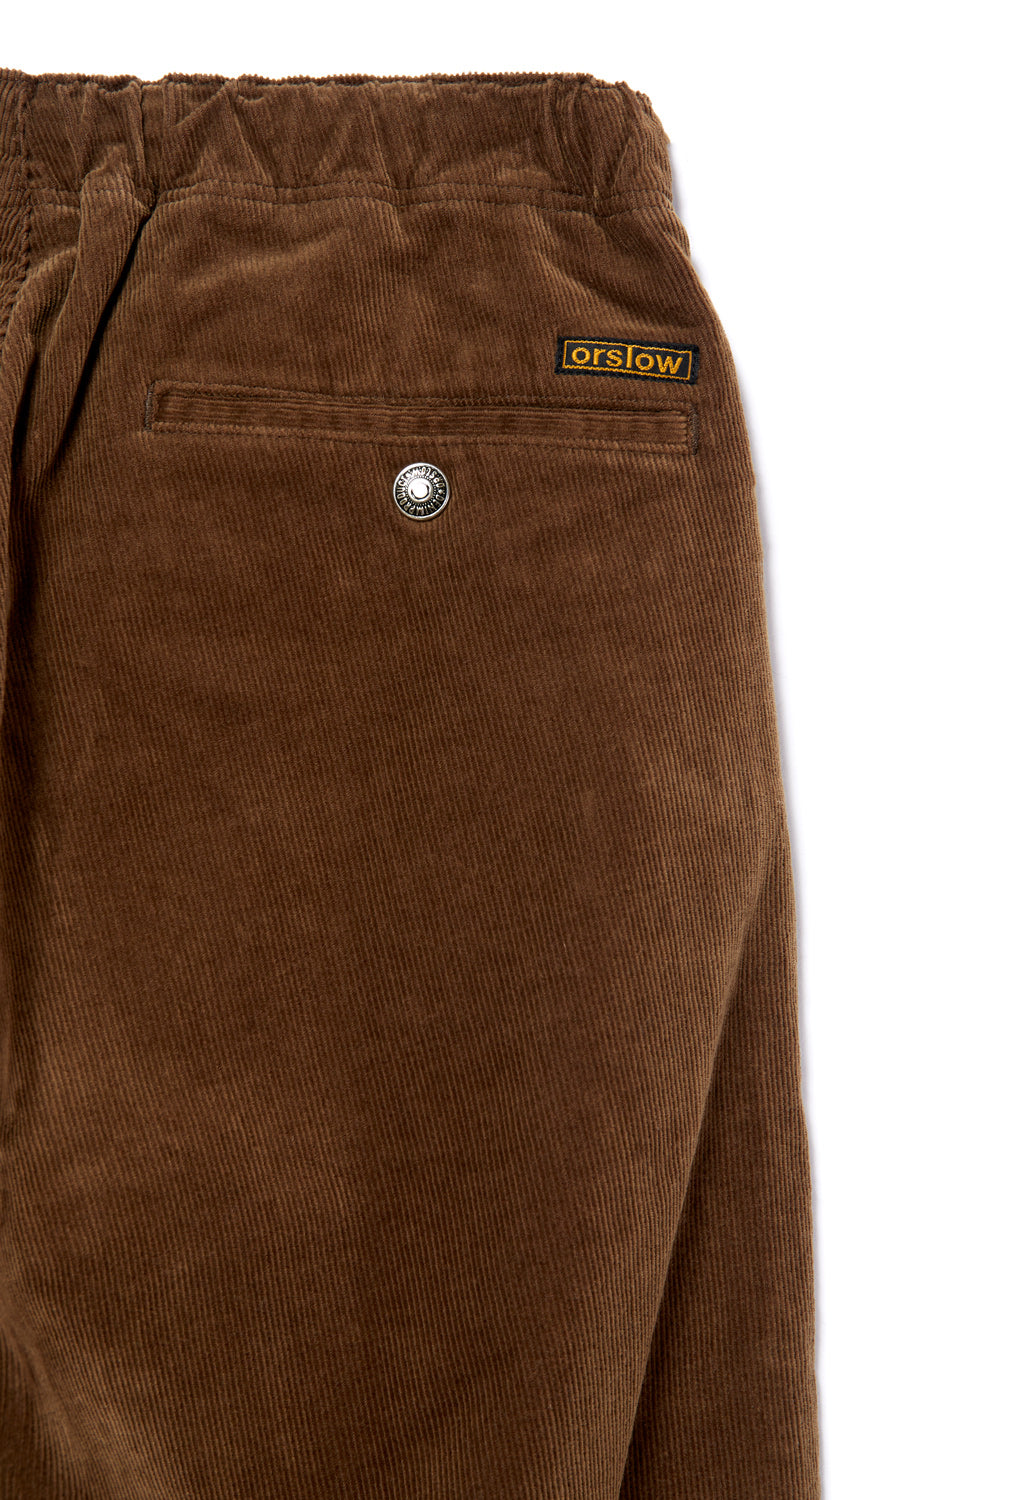 orSlow New Yorker Stretch Corduroy Pants - Brown